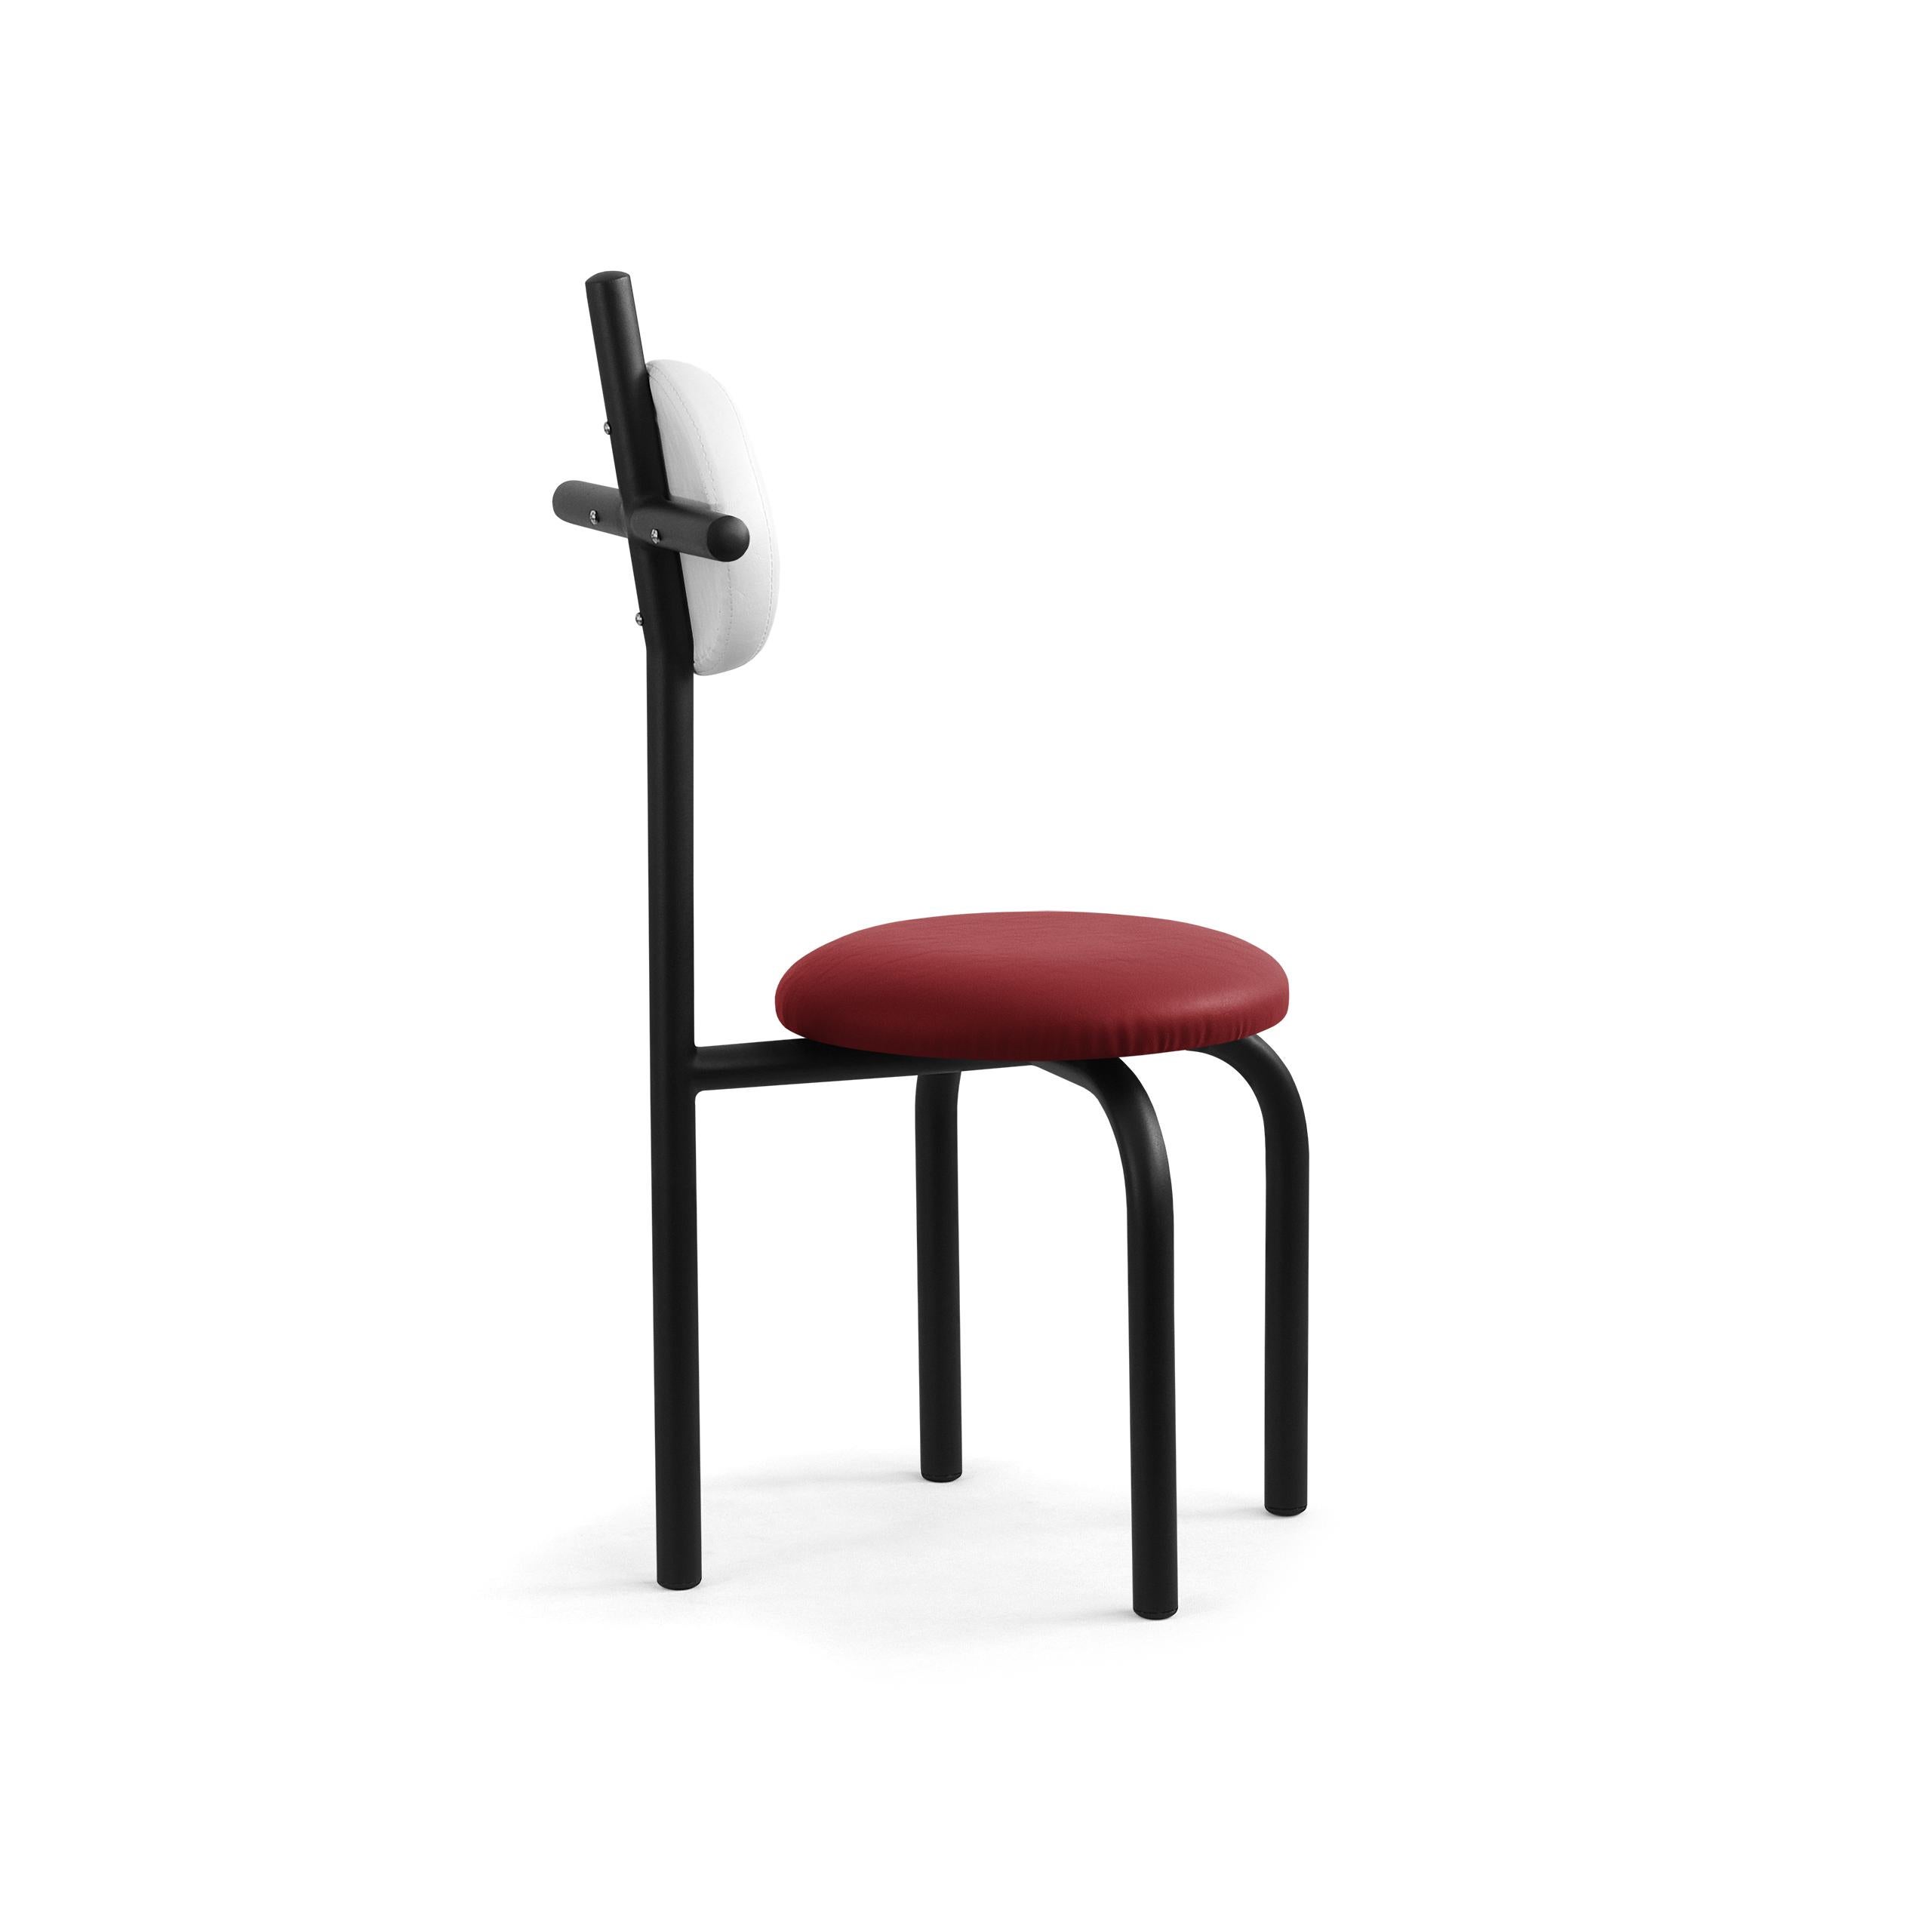 Appliqué PK16 Impermeable Chair, Red Seat & Carbon Steel Structure by Paulo Kobylka For Sale